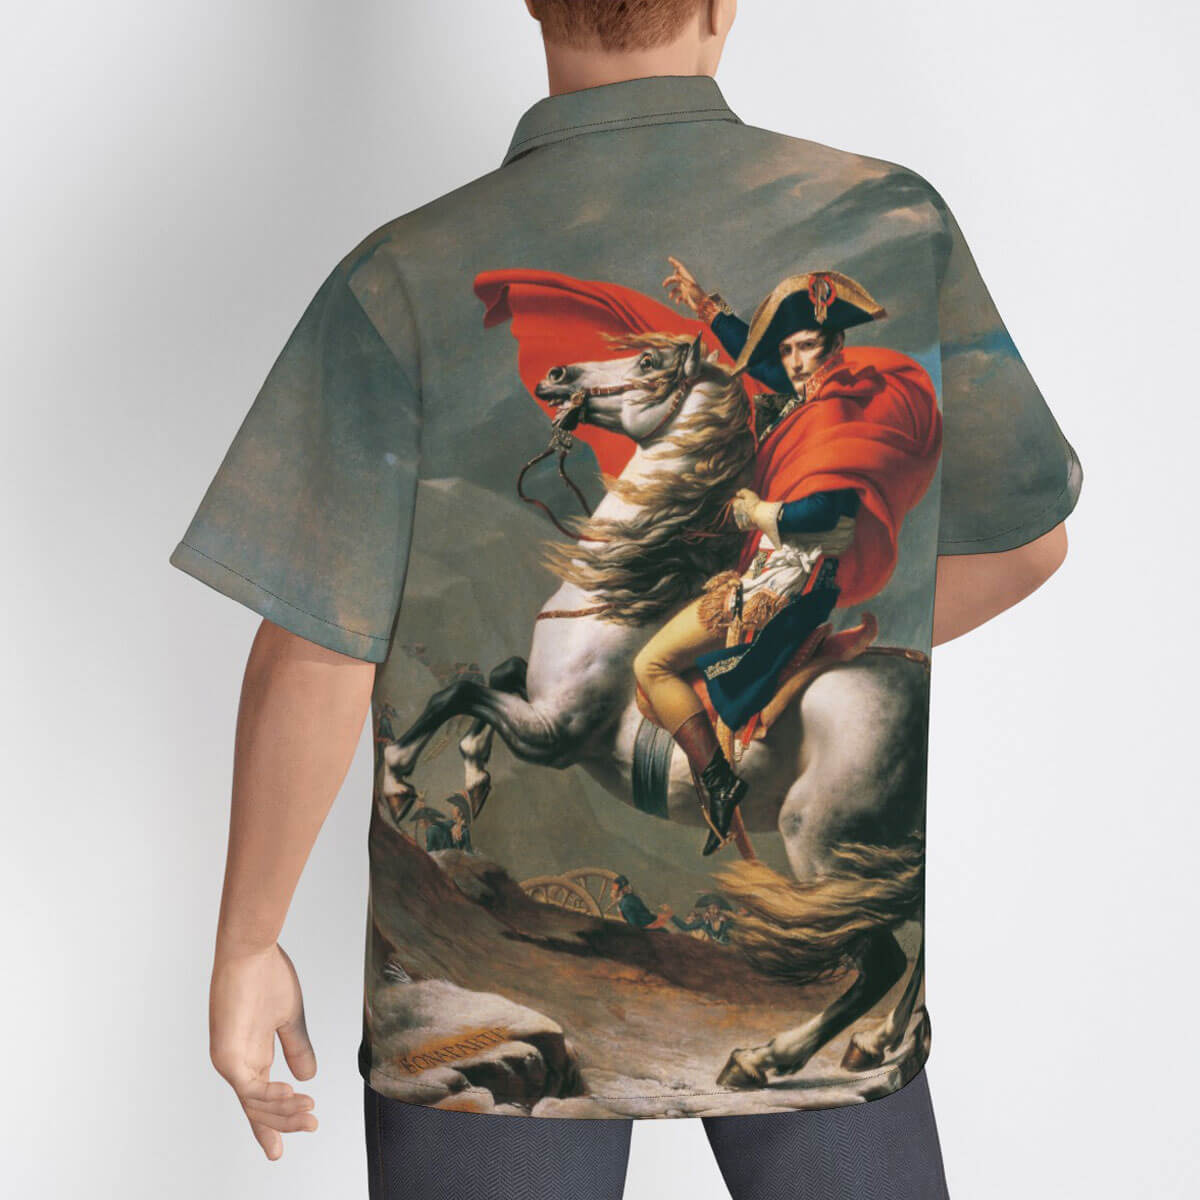 Back view of Jacques-Louis David's painting on shirt